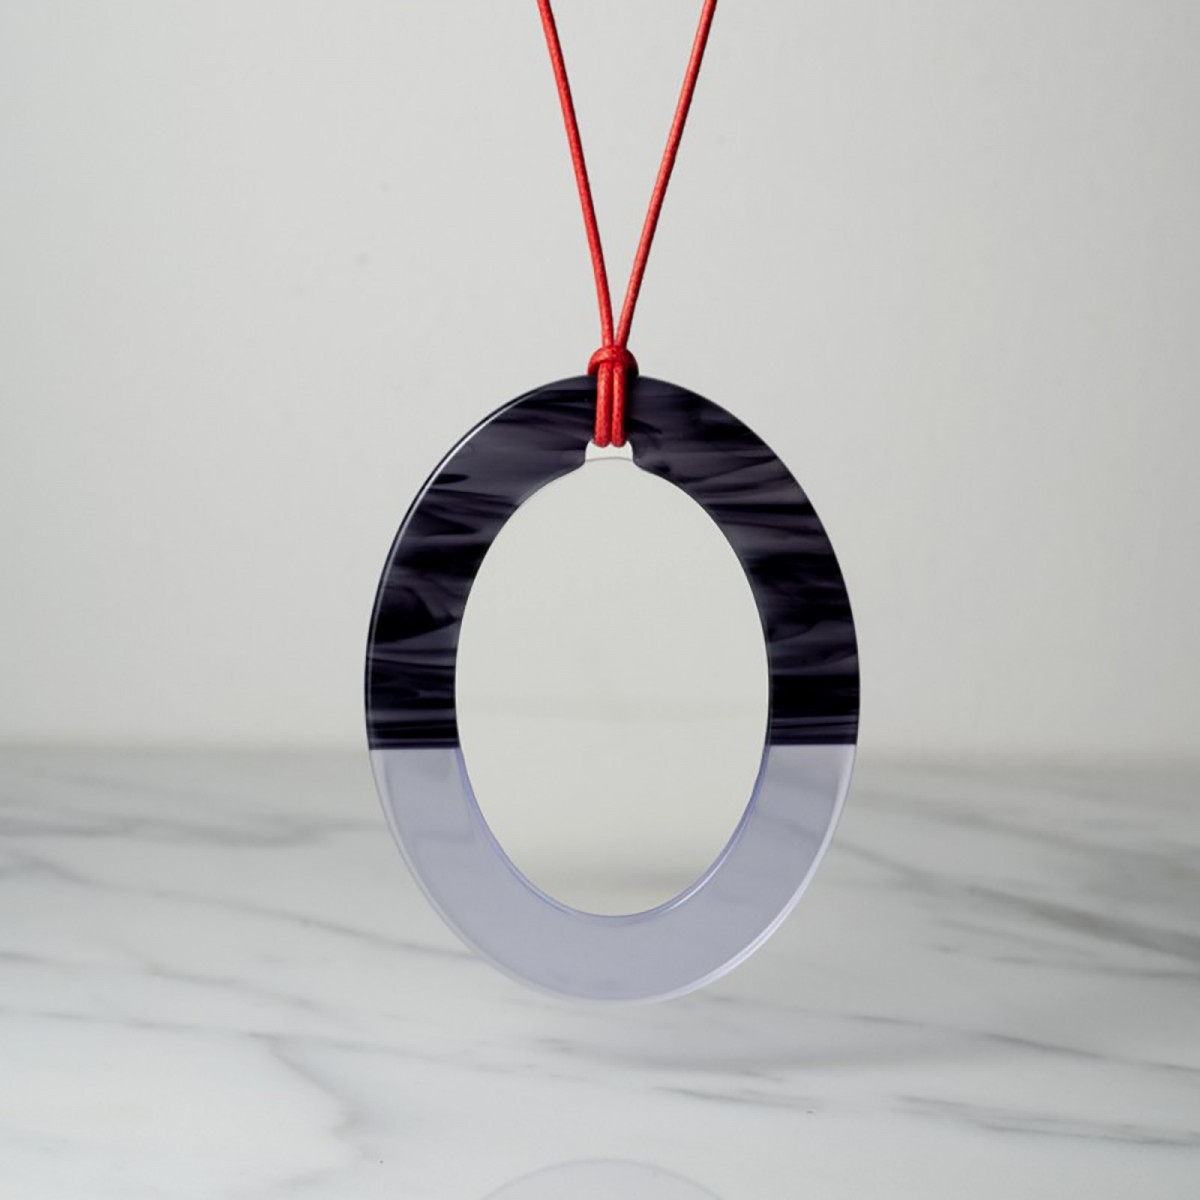 OVAL MAGNIFYING GLASS - Necklace-magnifying glass in acetate, handcrafted by the Hervé Domar workshop